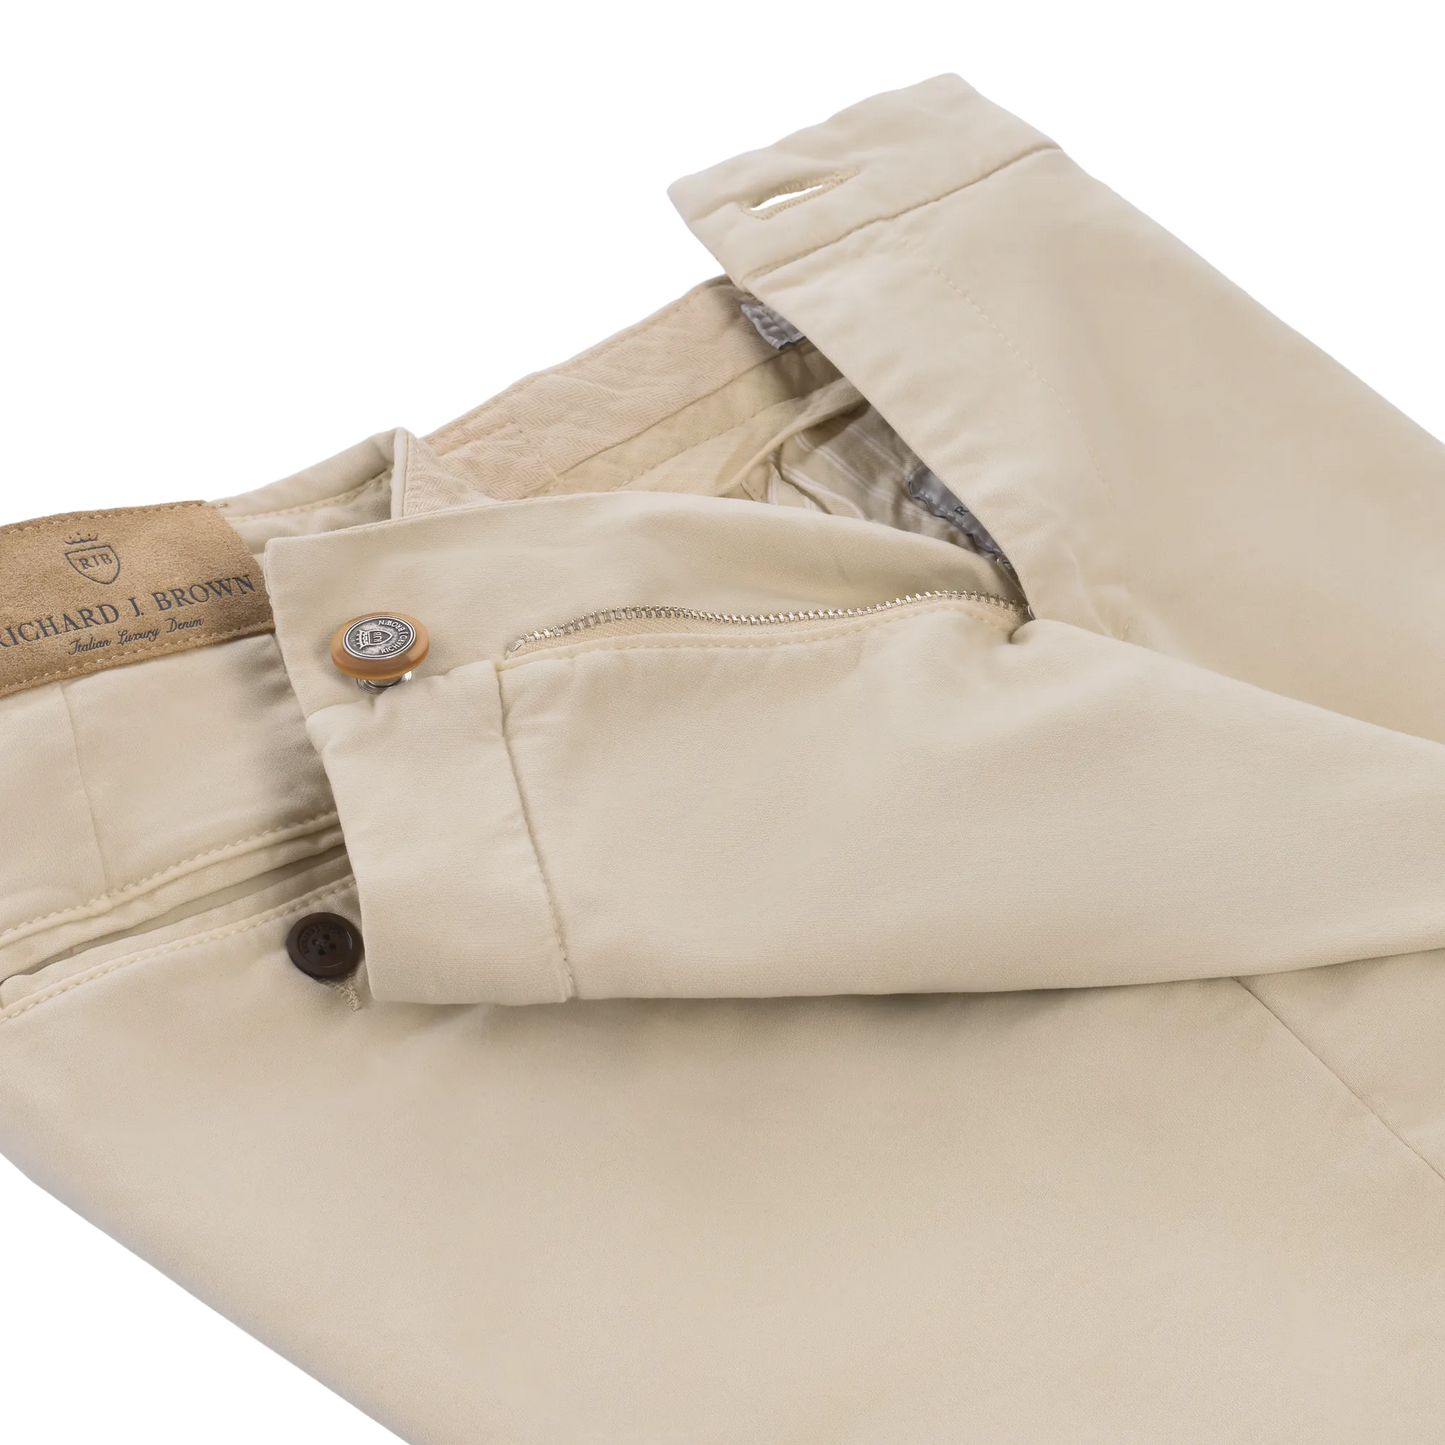 Slim-Fit Stretch-Cotton Trousers with Buckle Waist Adjusters in Cream